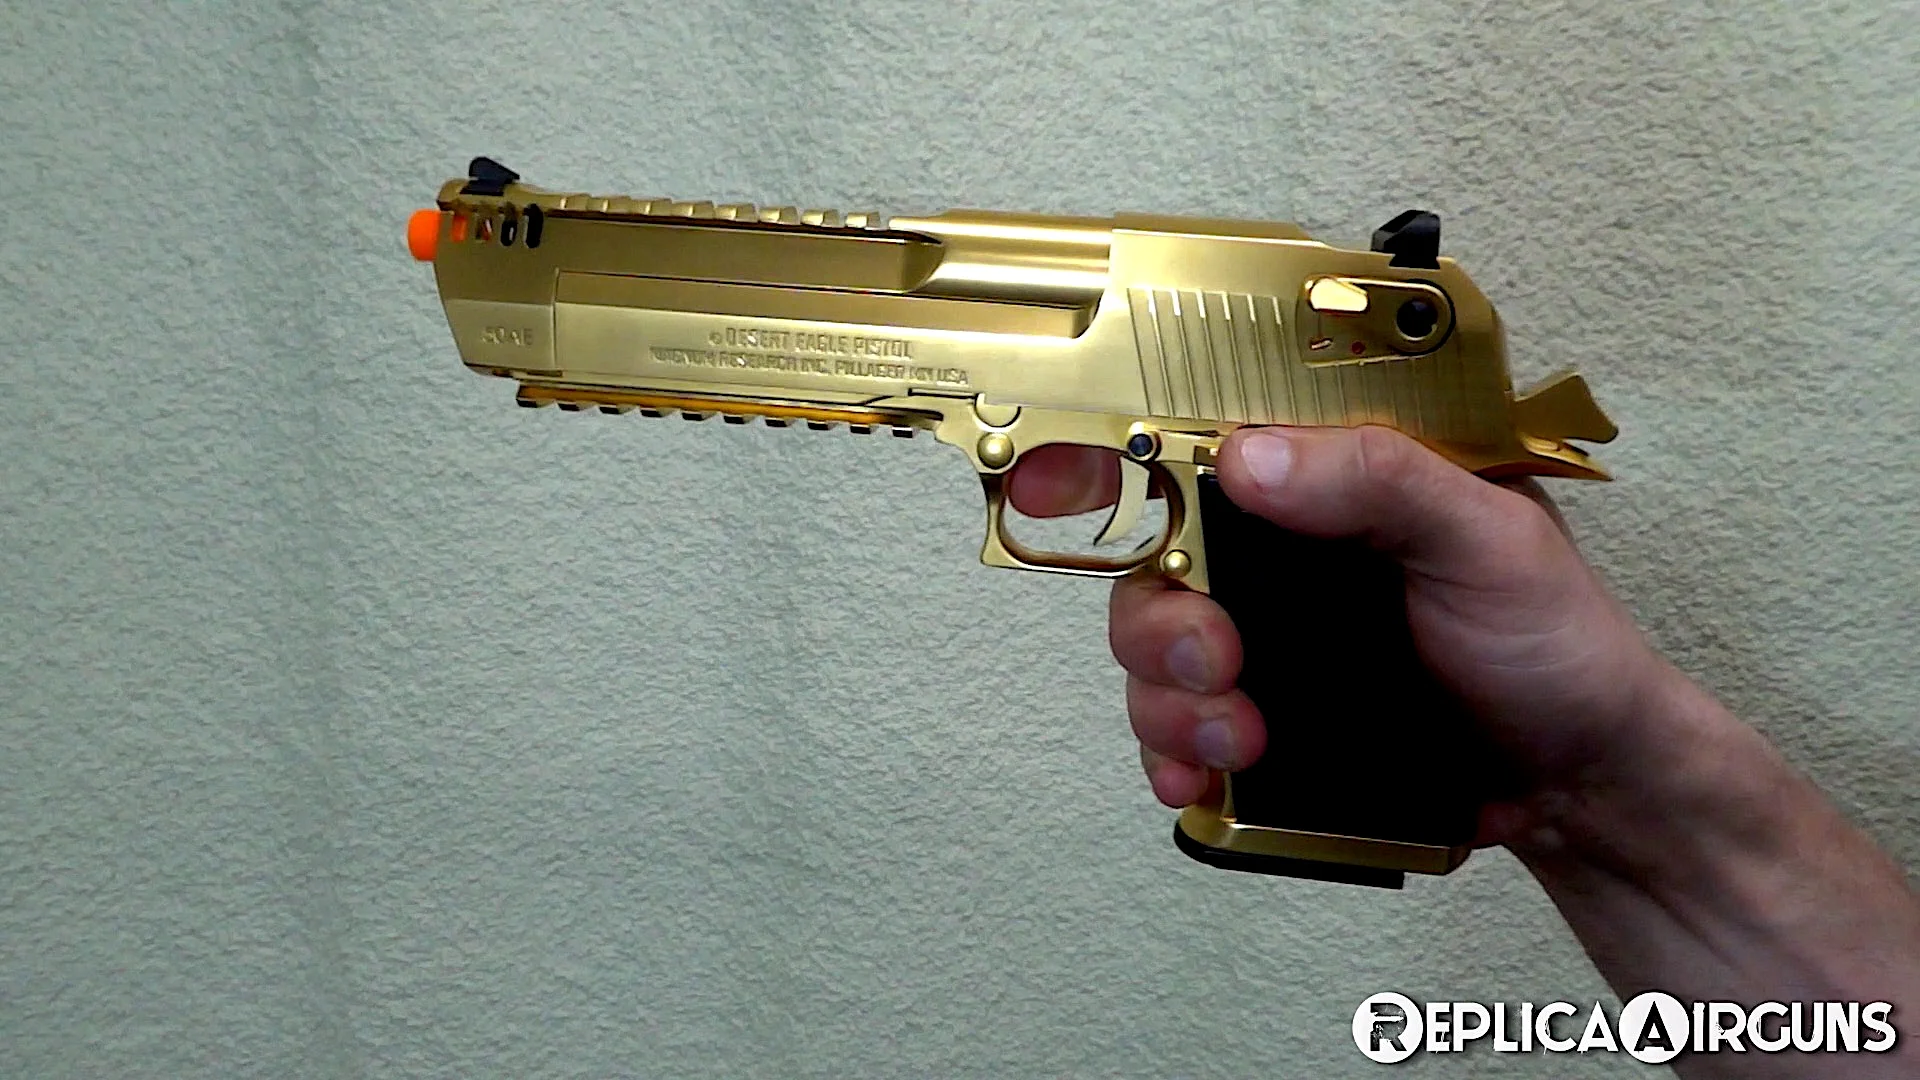 Cybergun Licensed L6 .50AE Desert Eagle GBB Airsoft Pistol Field Test  Review.mp4 on Vimeo